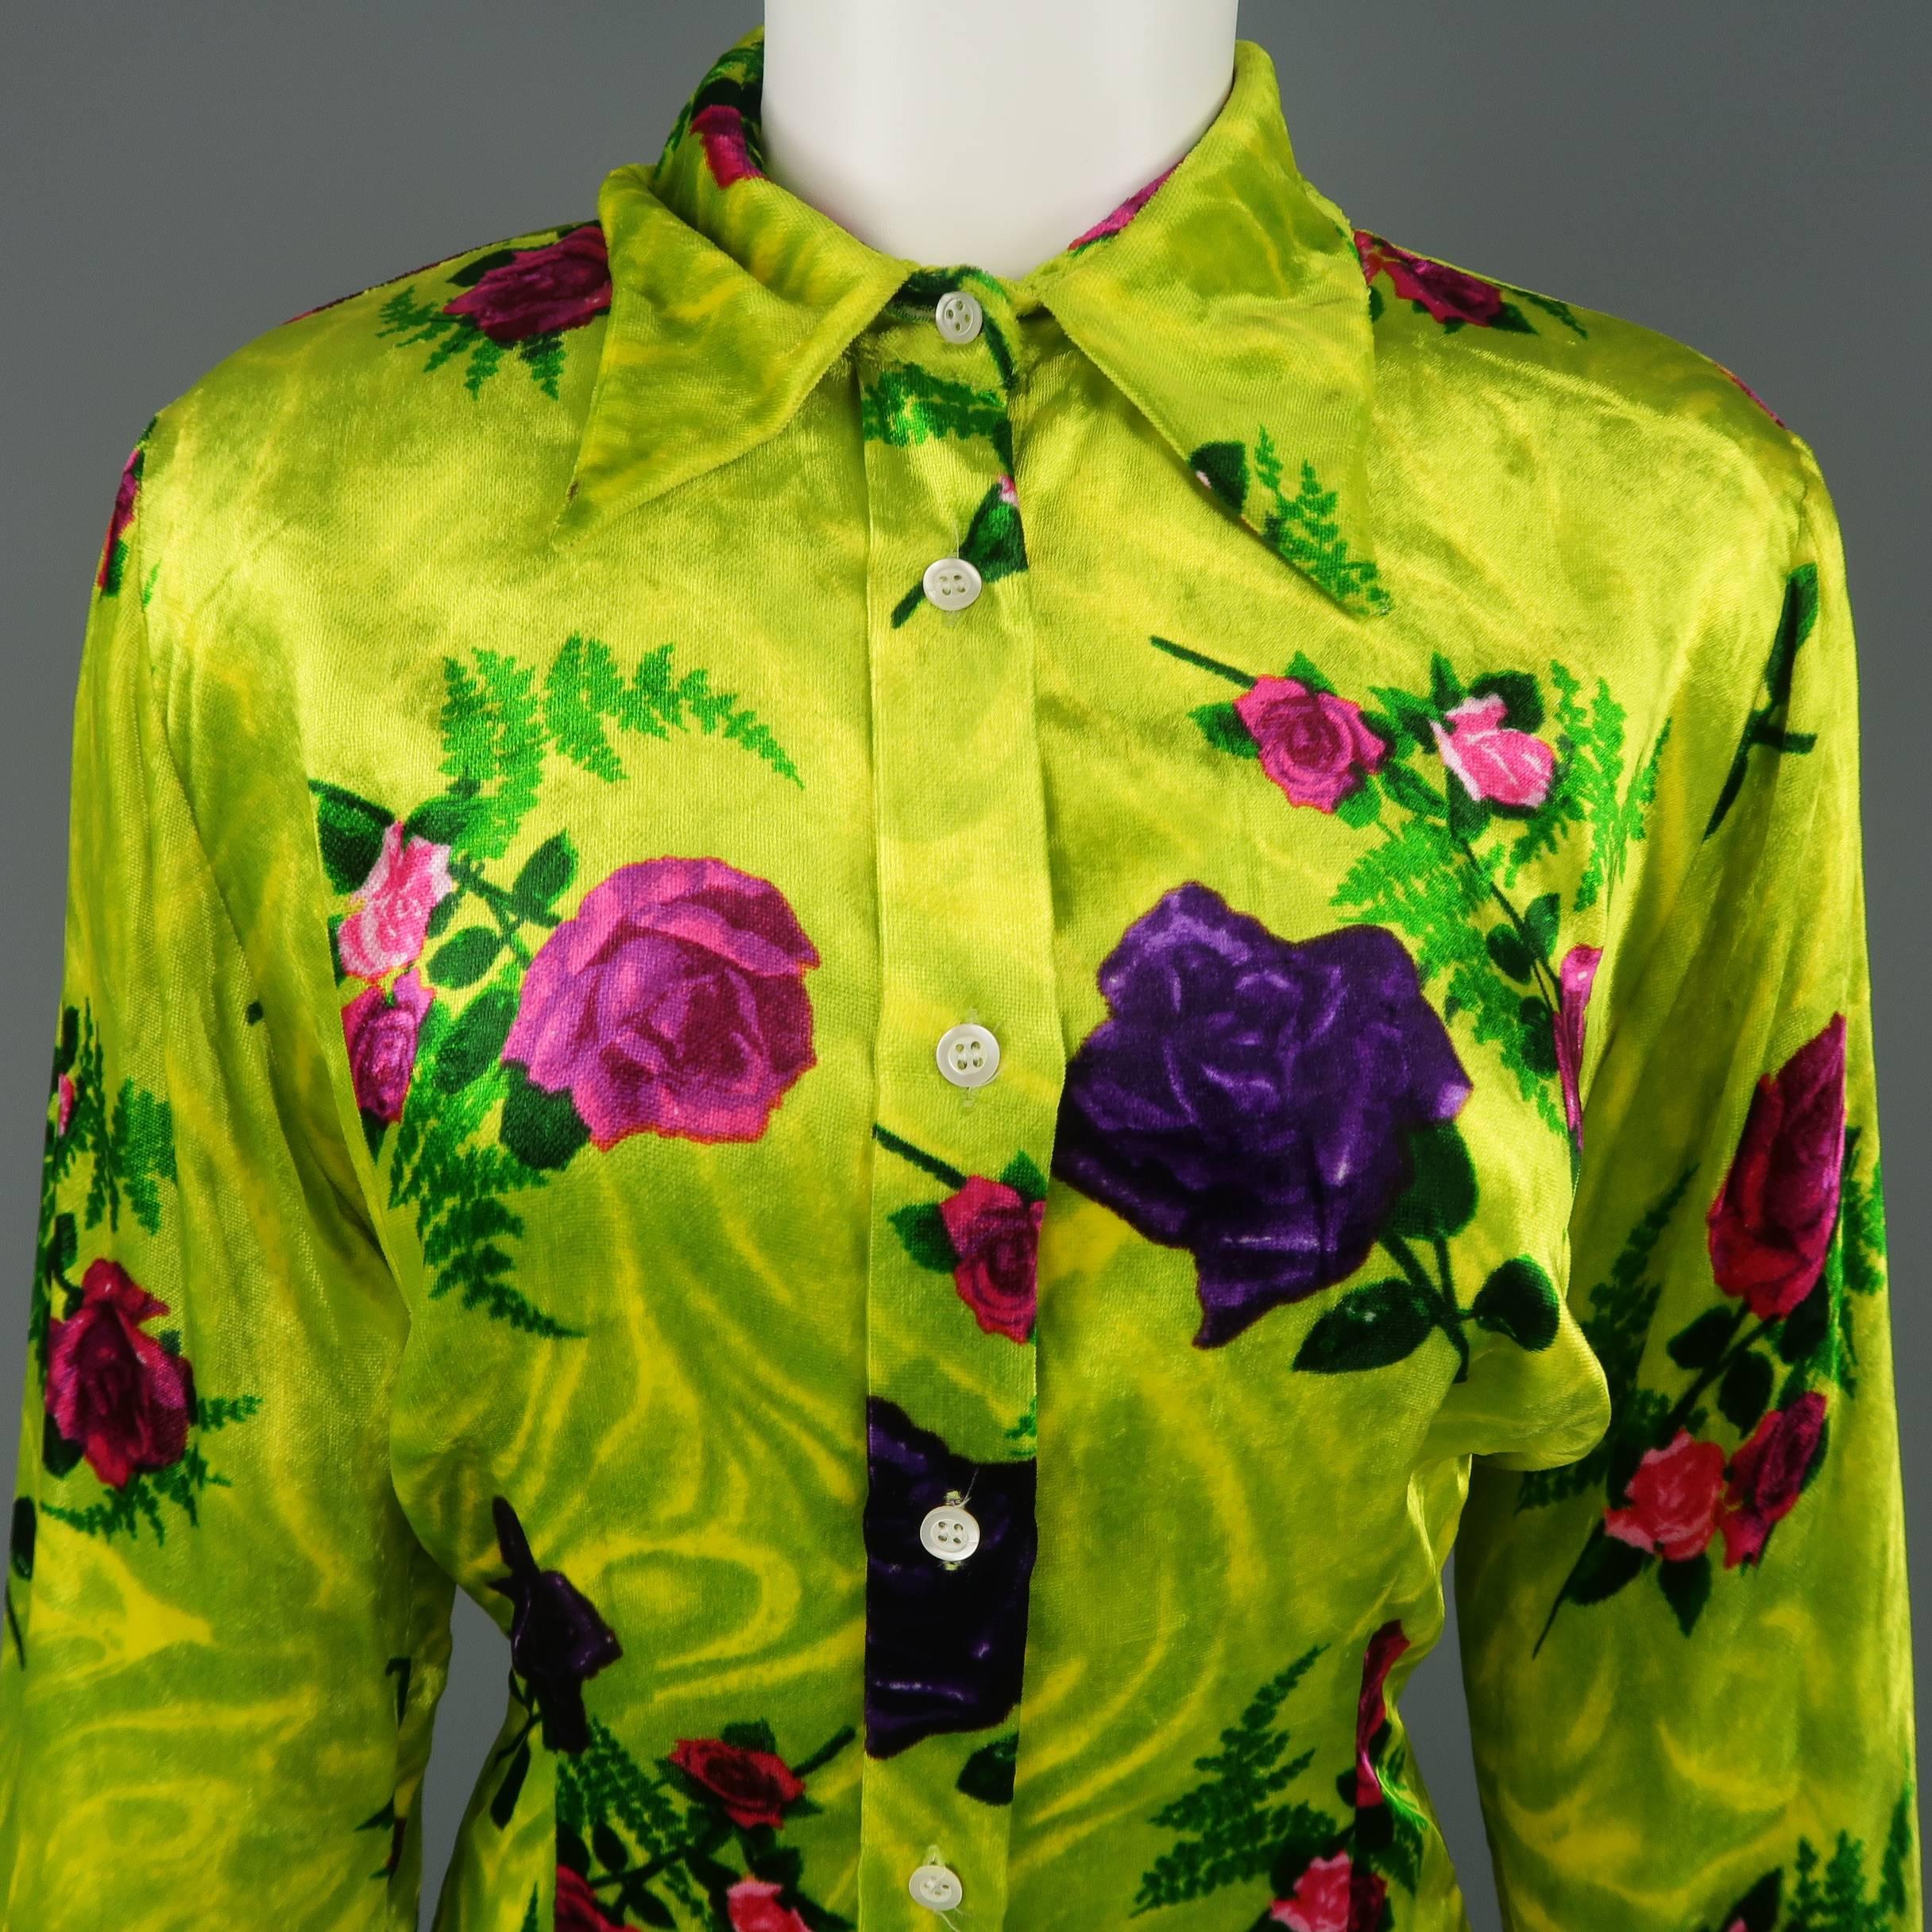 Vintage Dries van Noten blouse comes in bright chartreuse green velvet with hot pink and purple psychedelic rose print throughout, darted waist, and pointed collar. Made in Belgium.
 
Excellent Pre-Owned Condition.
Marked: DE 40
 
Measurements:
